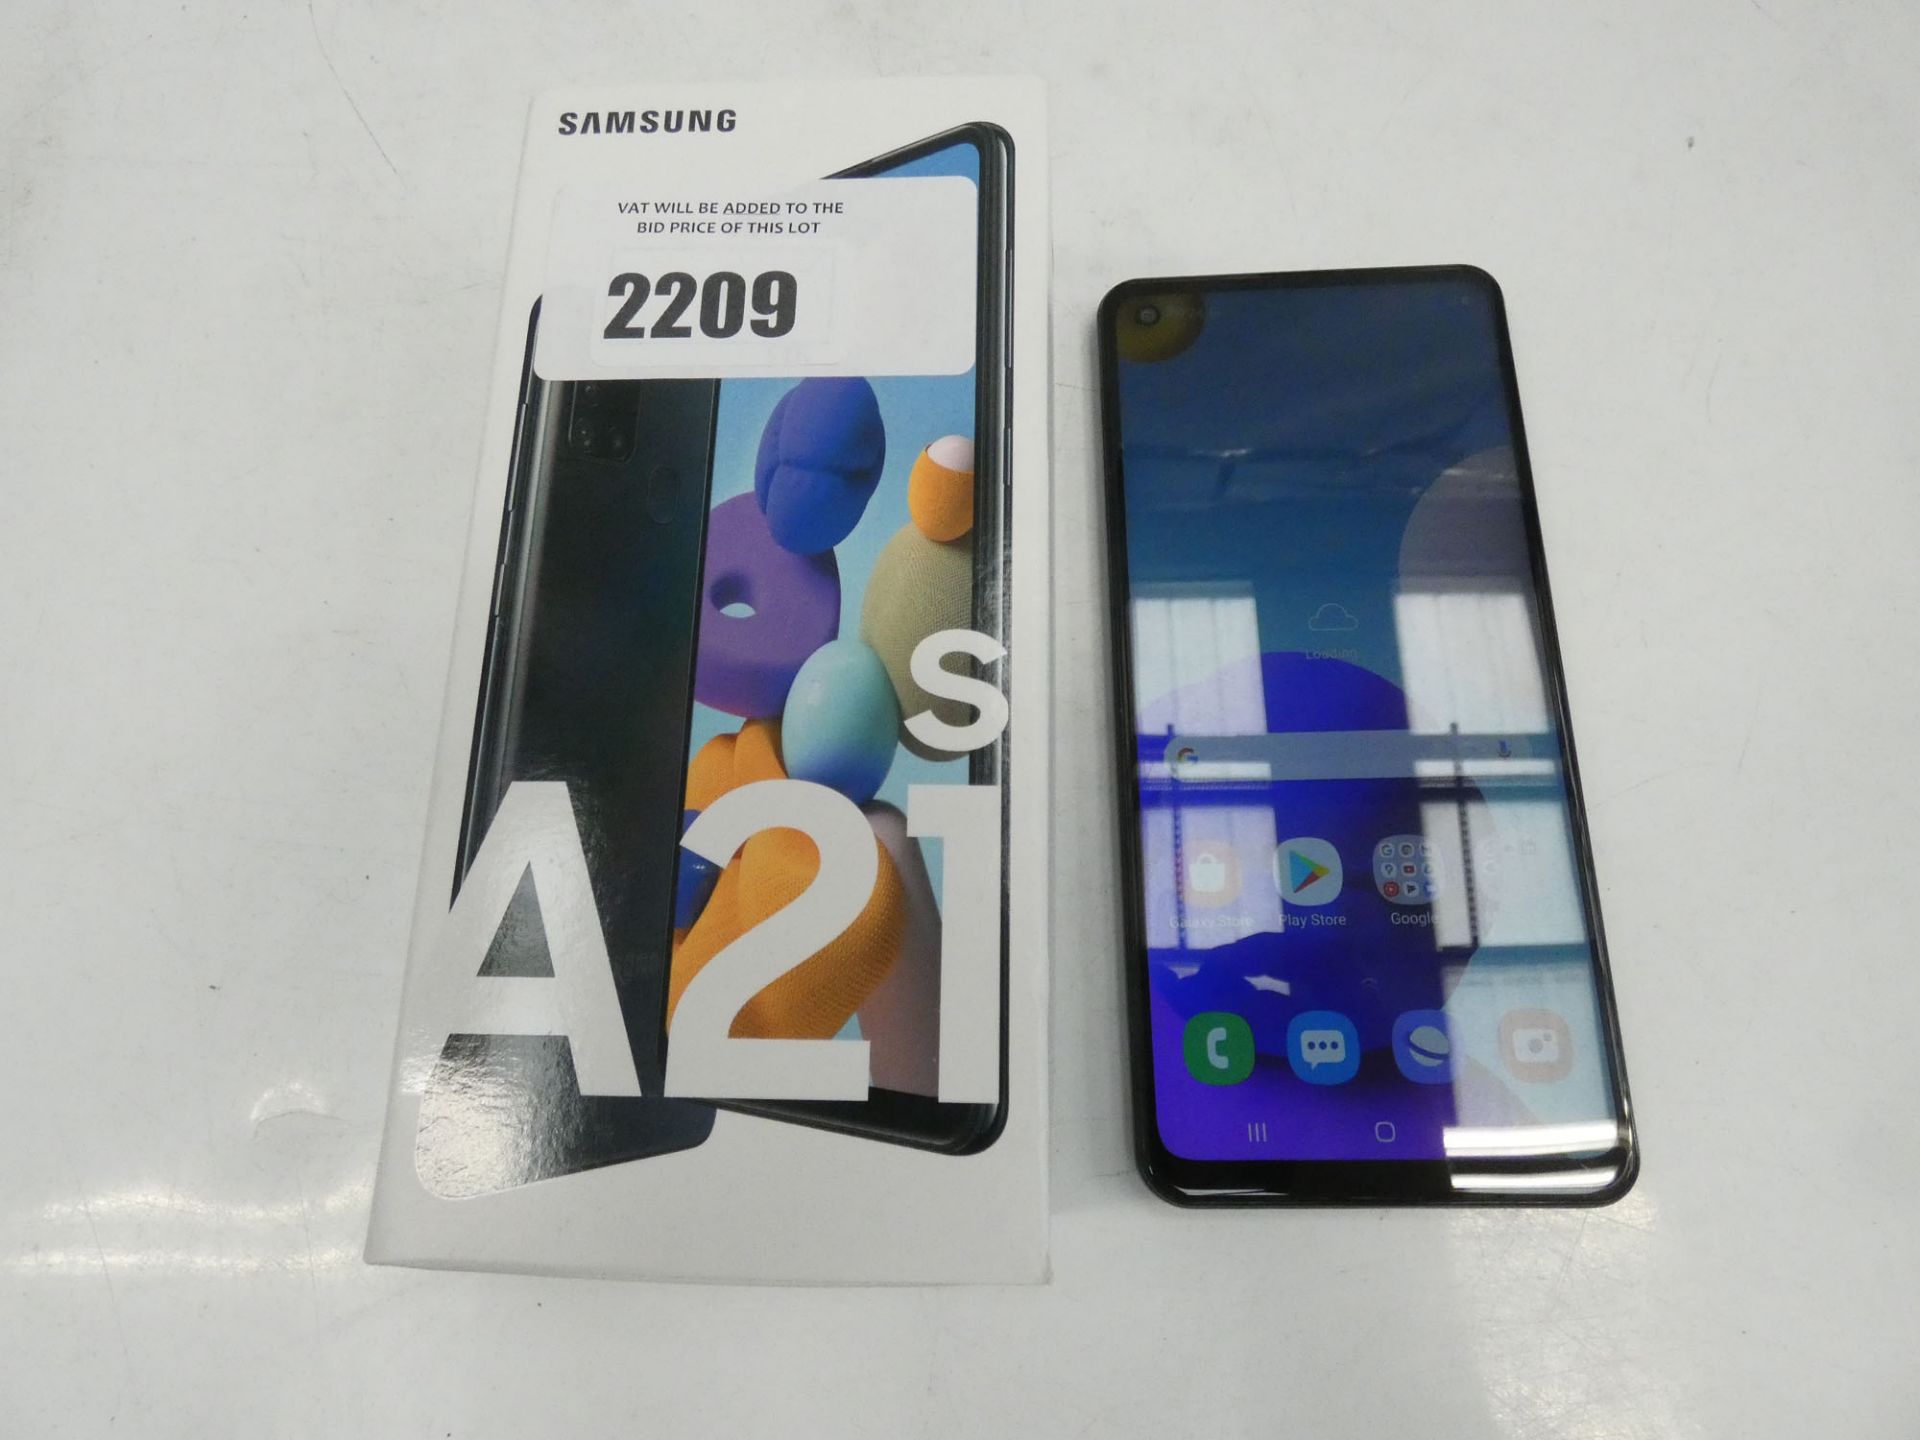 Samsung A21s 32GB smartphone with box